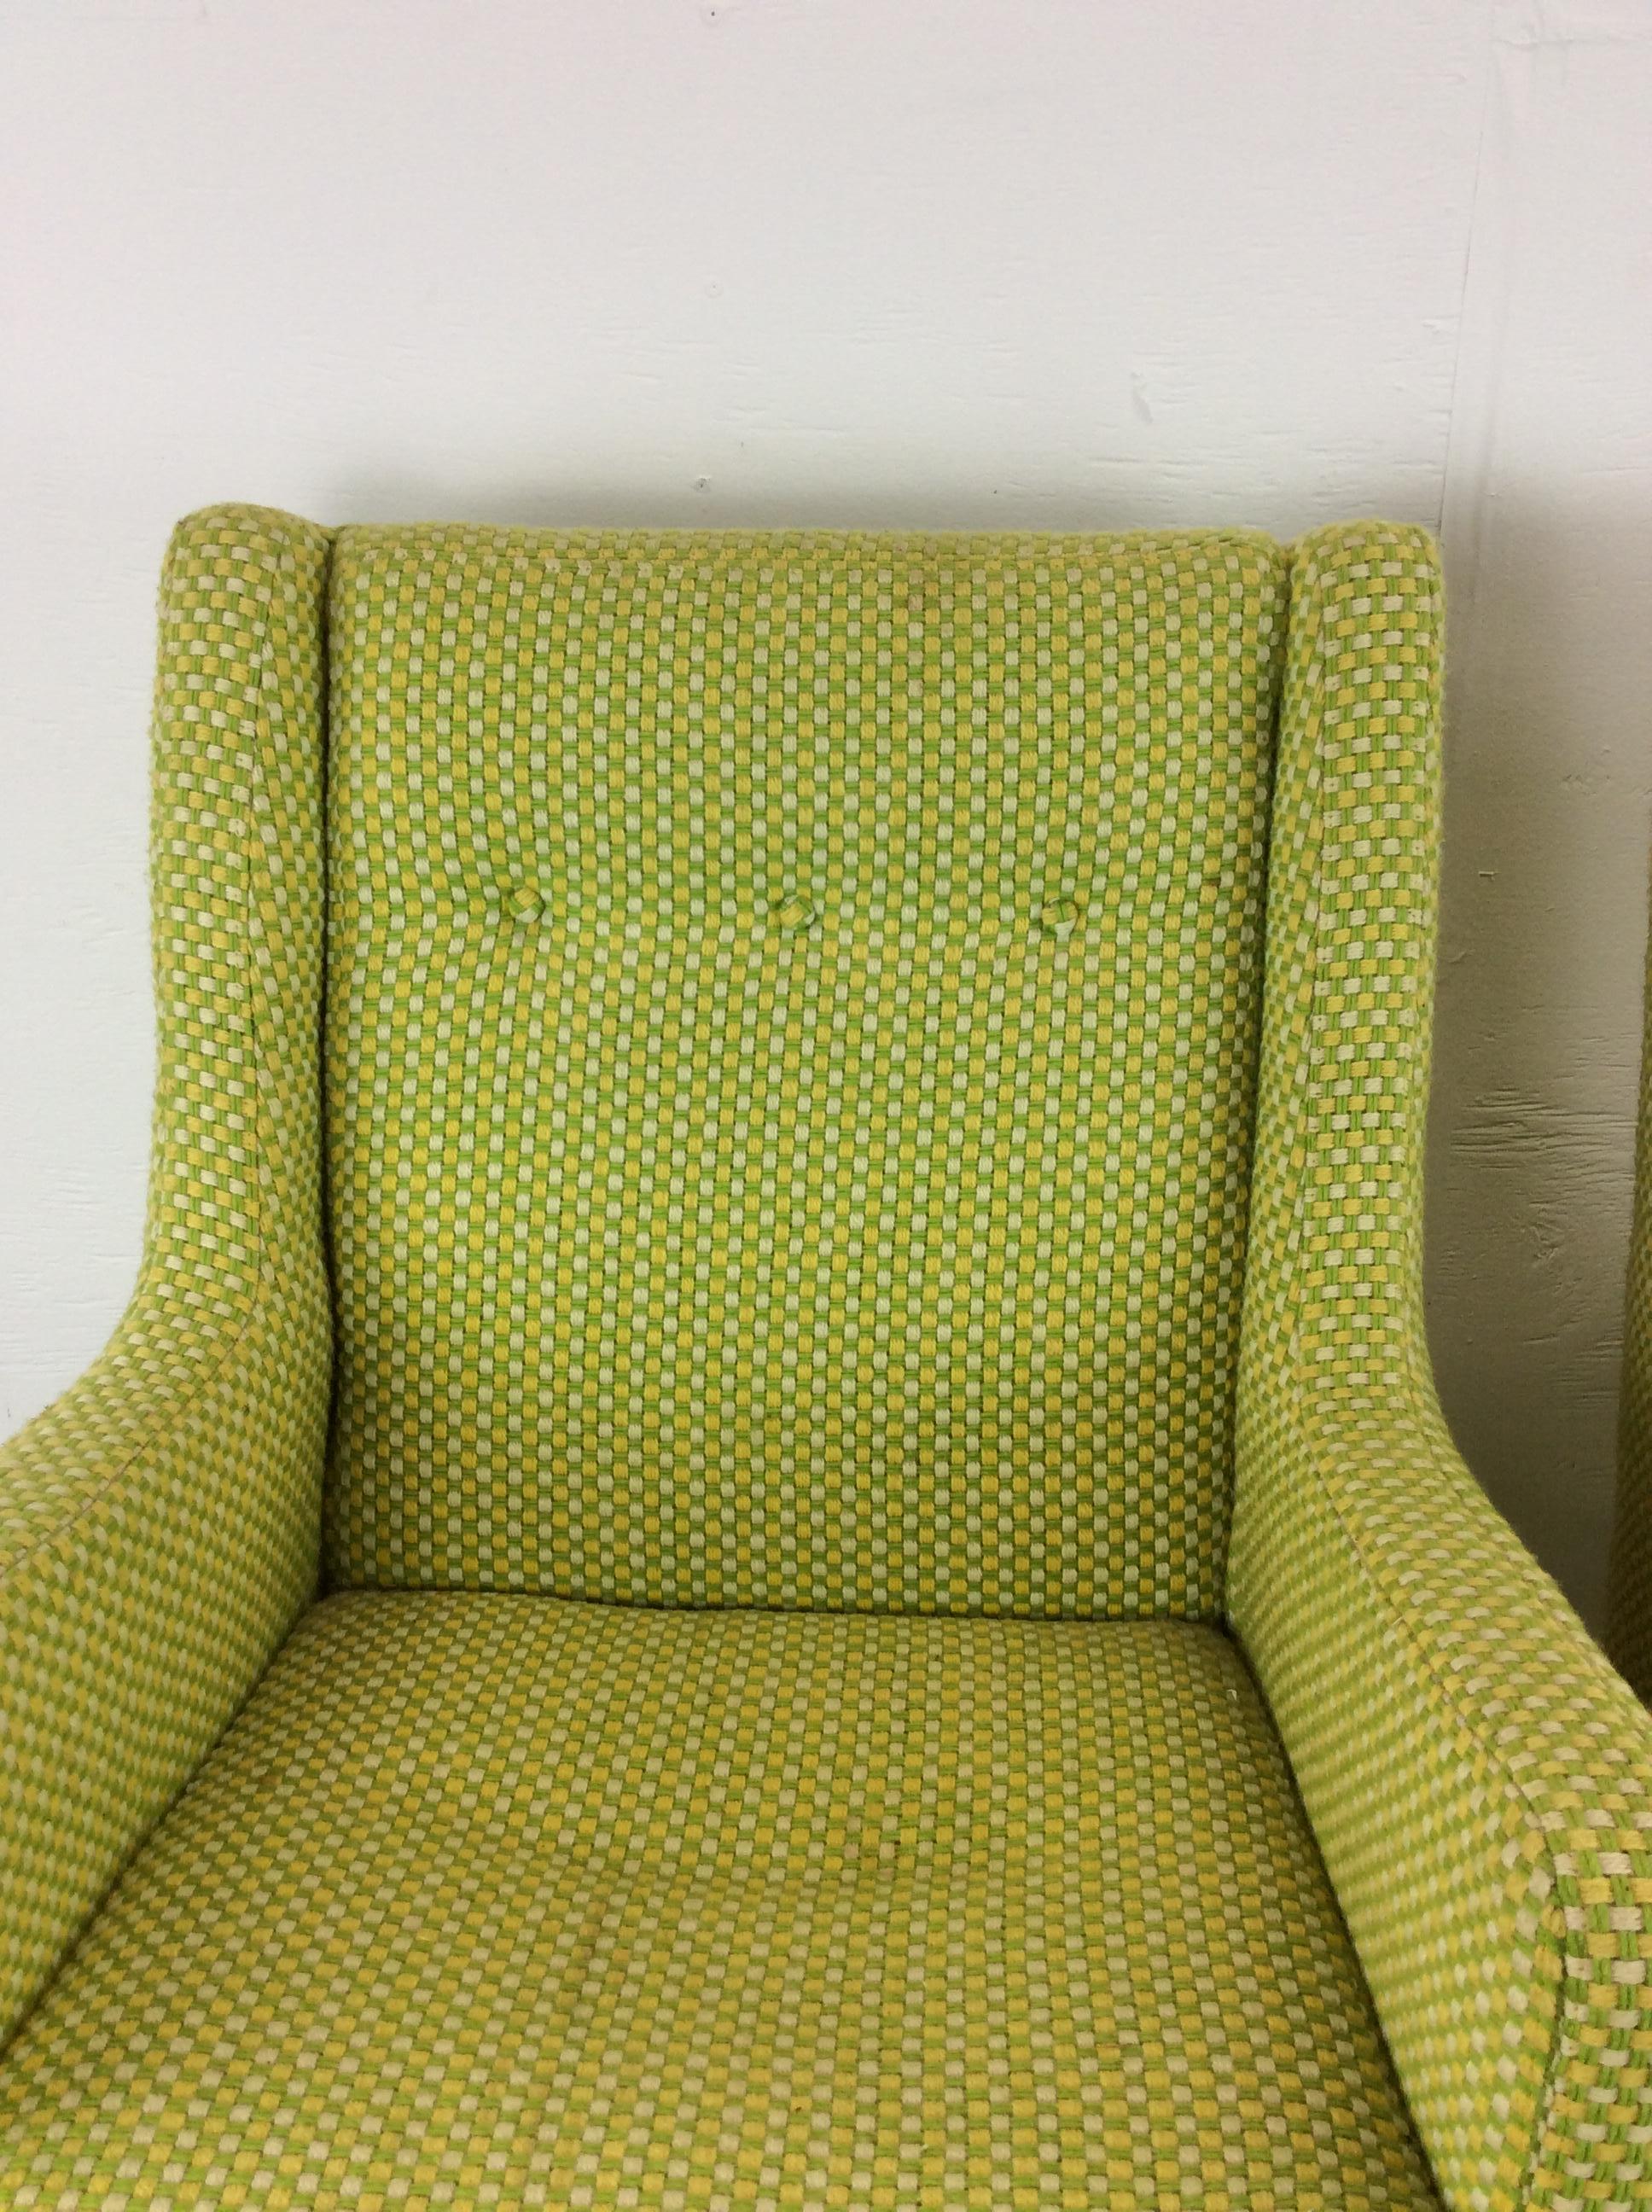 Pair of Mid Century Modern Green Armchairs with Tufted Seat Back In Excellent Condition For Sale In Freehold, NJ